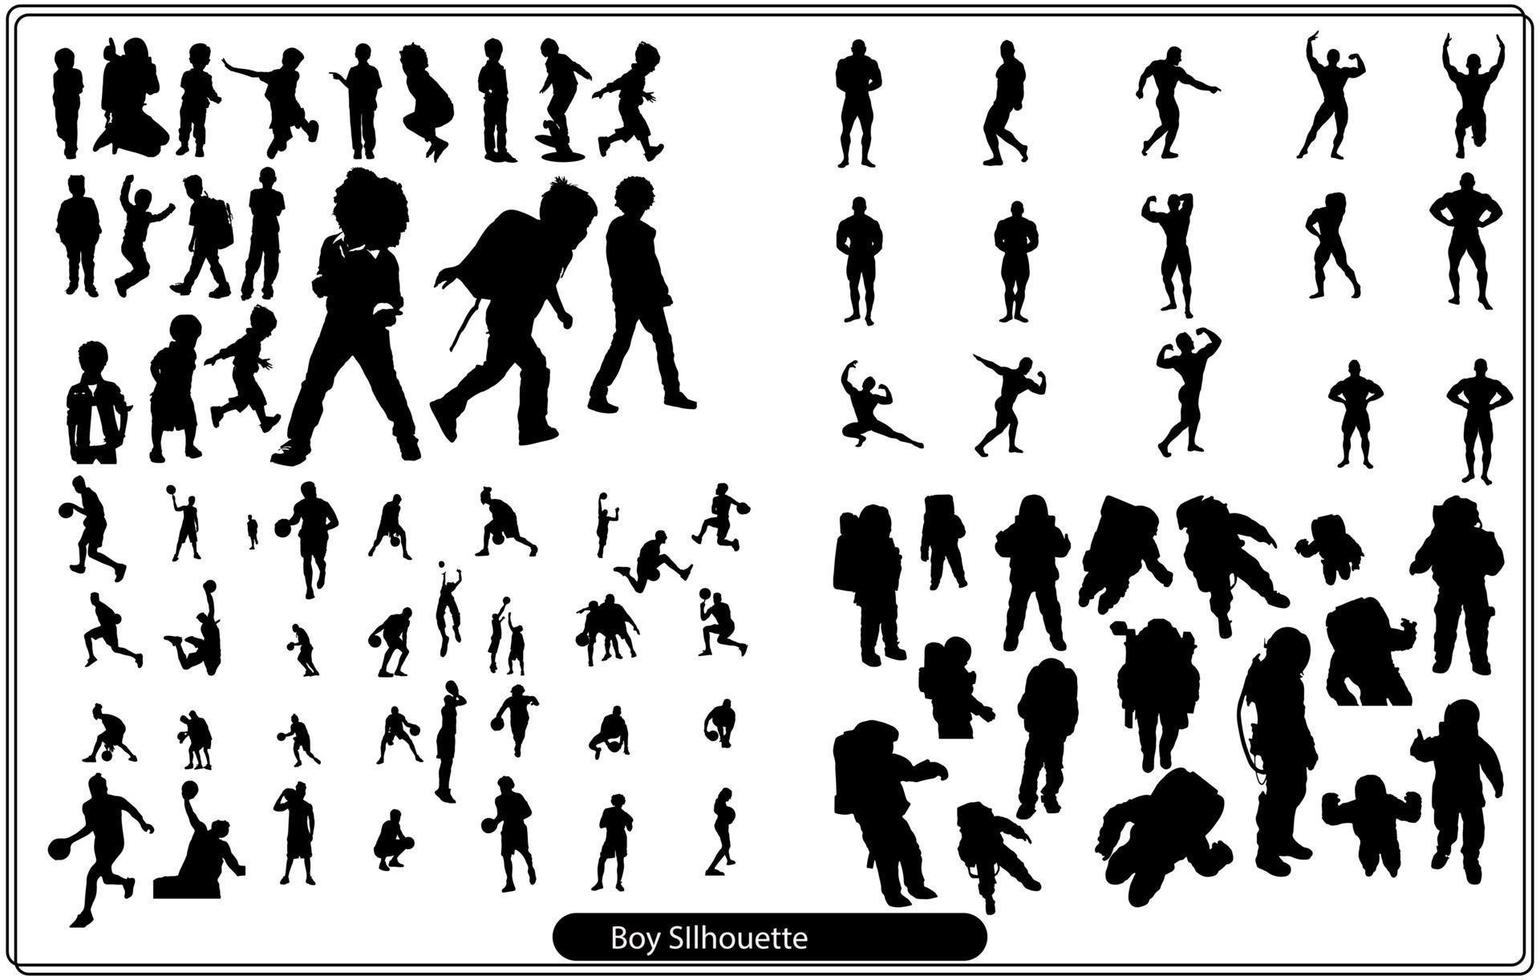 Kids silhouettes in different poses set vector